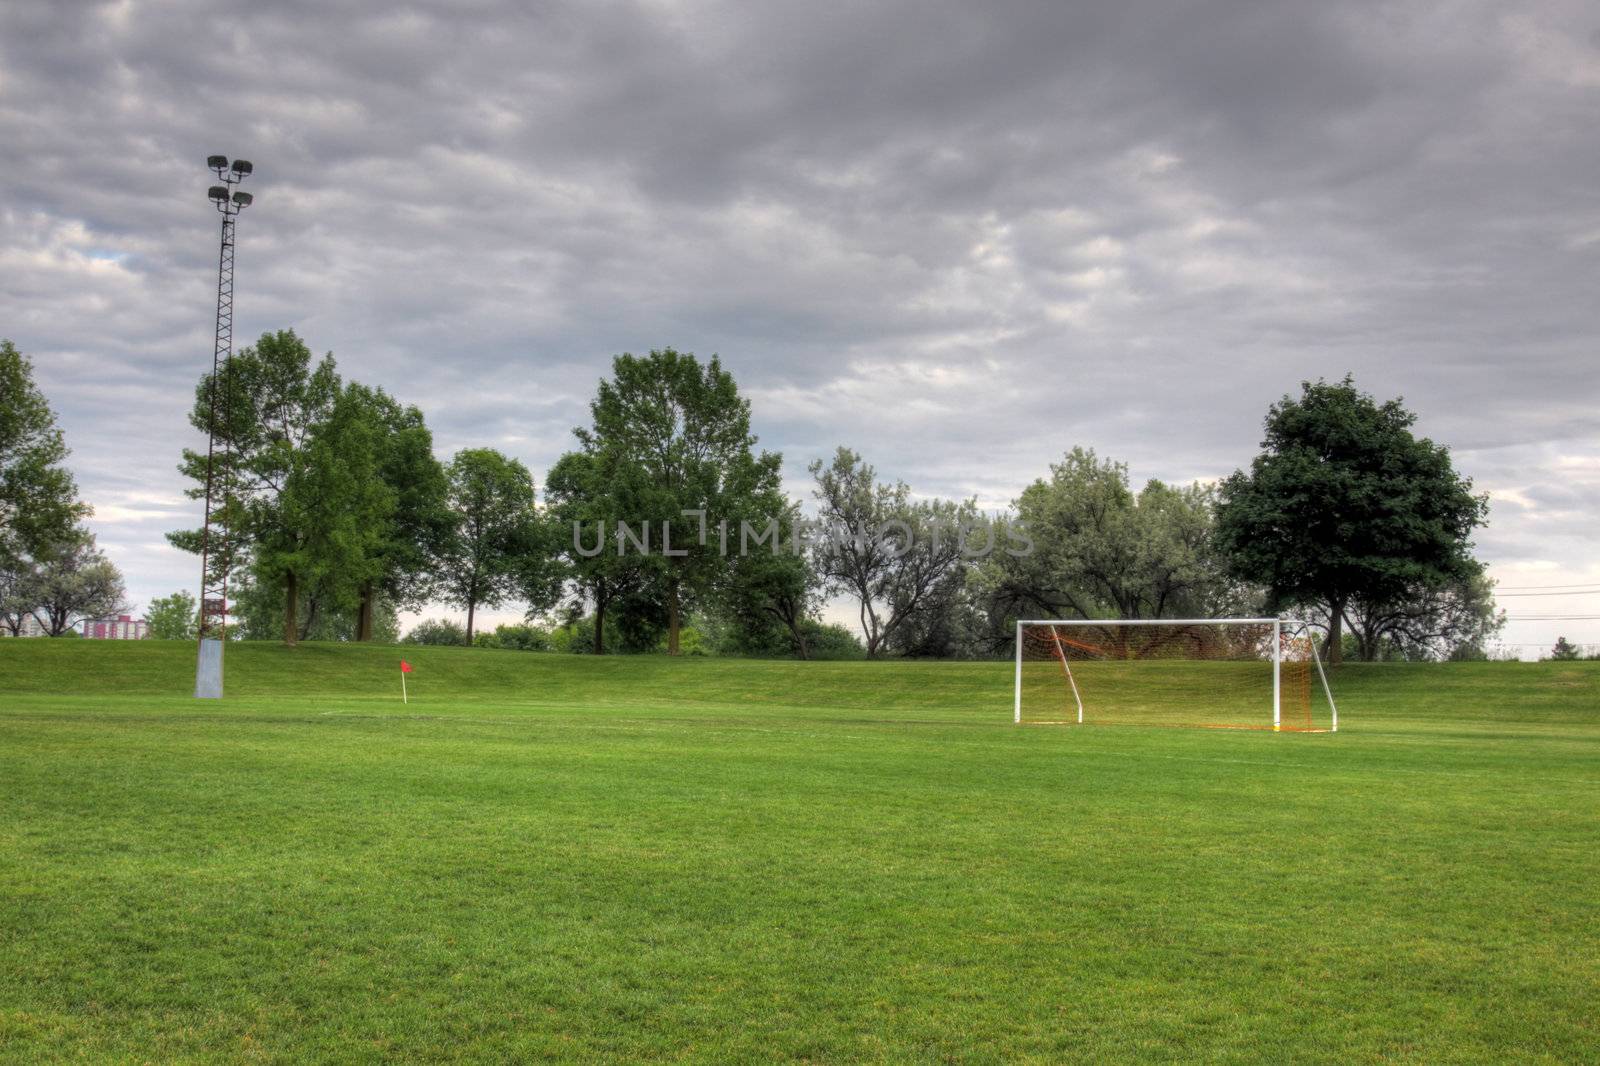 A cloudy unoccupied soccer field with trees in the background. (HDR photograph)